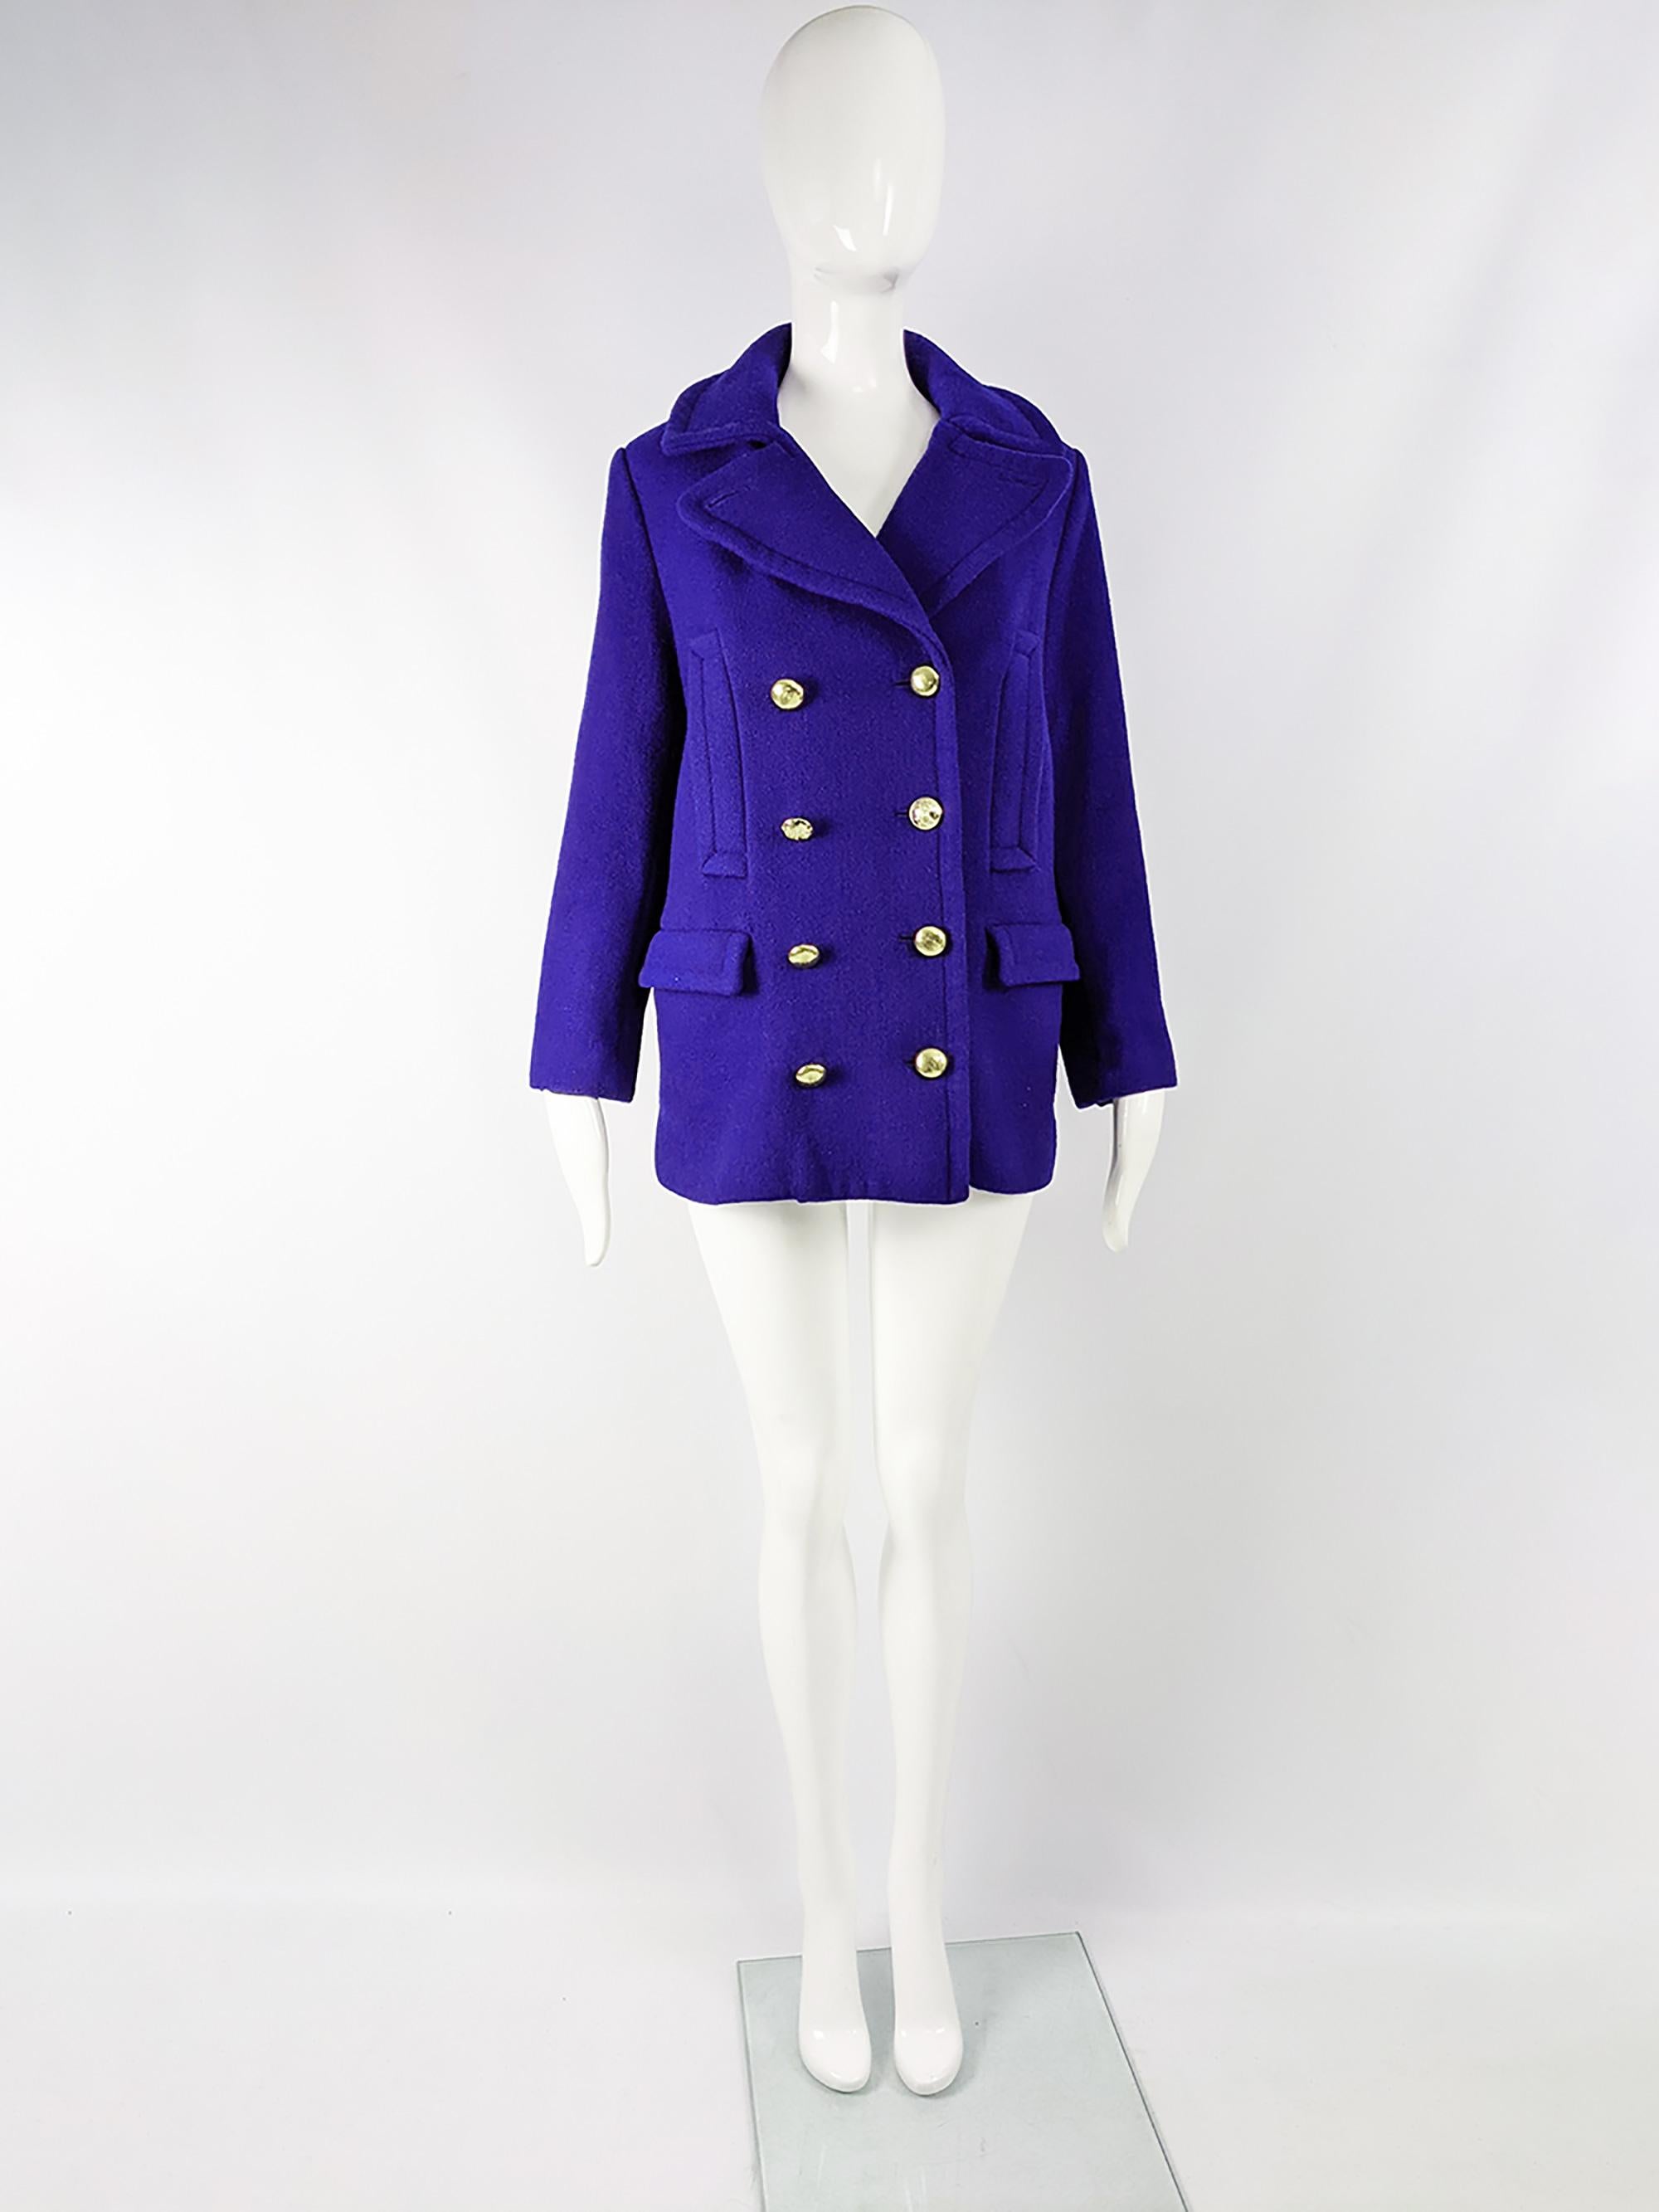 A glamorous Coach pea coat in a blue wool blend with branded military style gold double breasted buttons. 

Size: Marked Small / Petite. 
Bust - 36” / 91cm (allow roughly 2-4